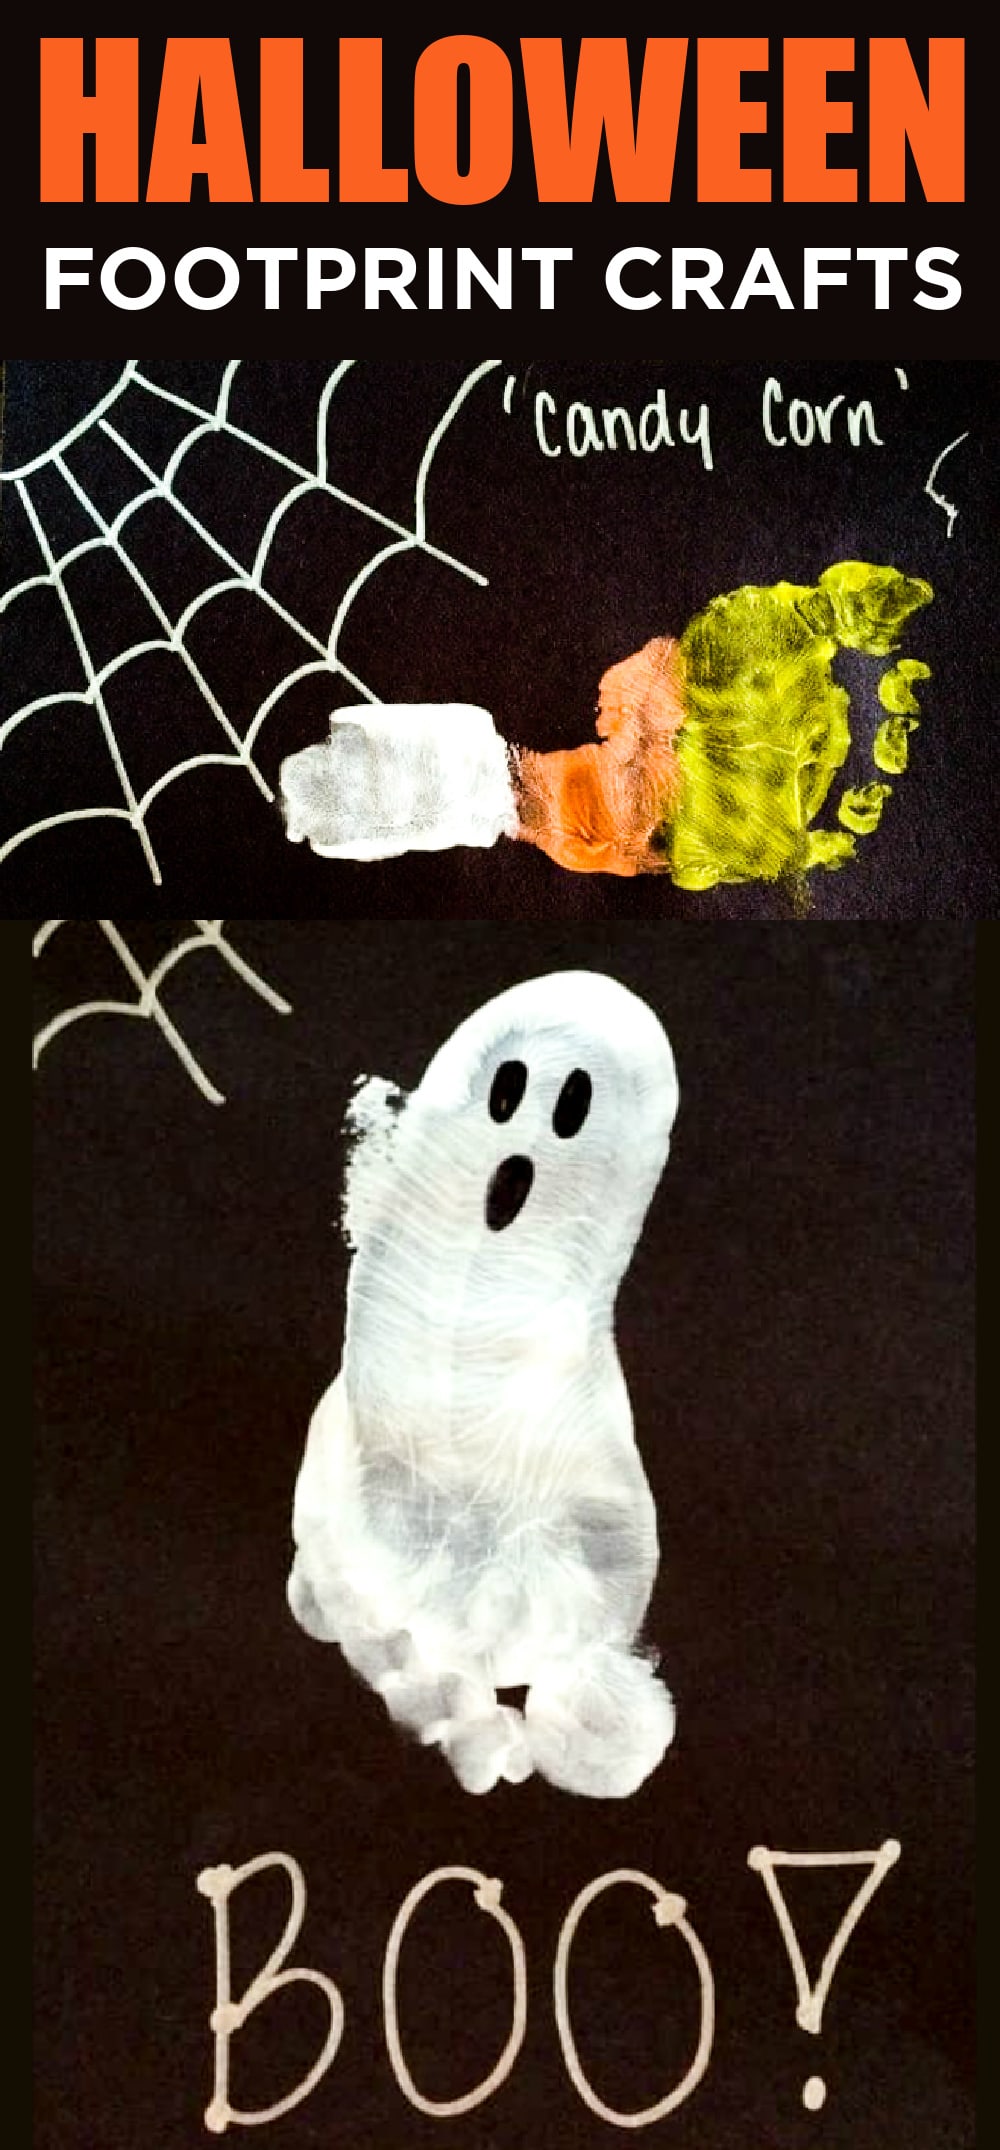 Halloween crafts for babies